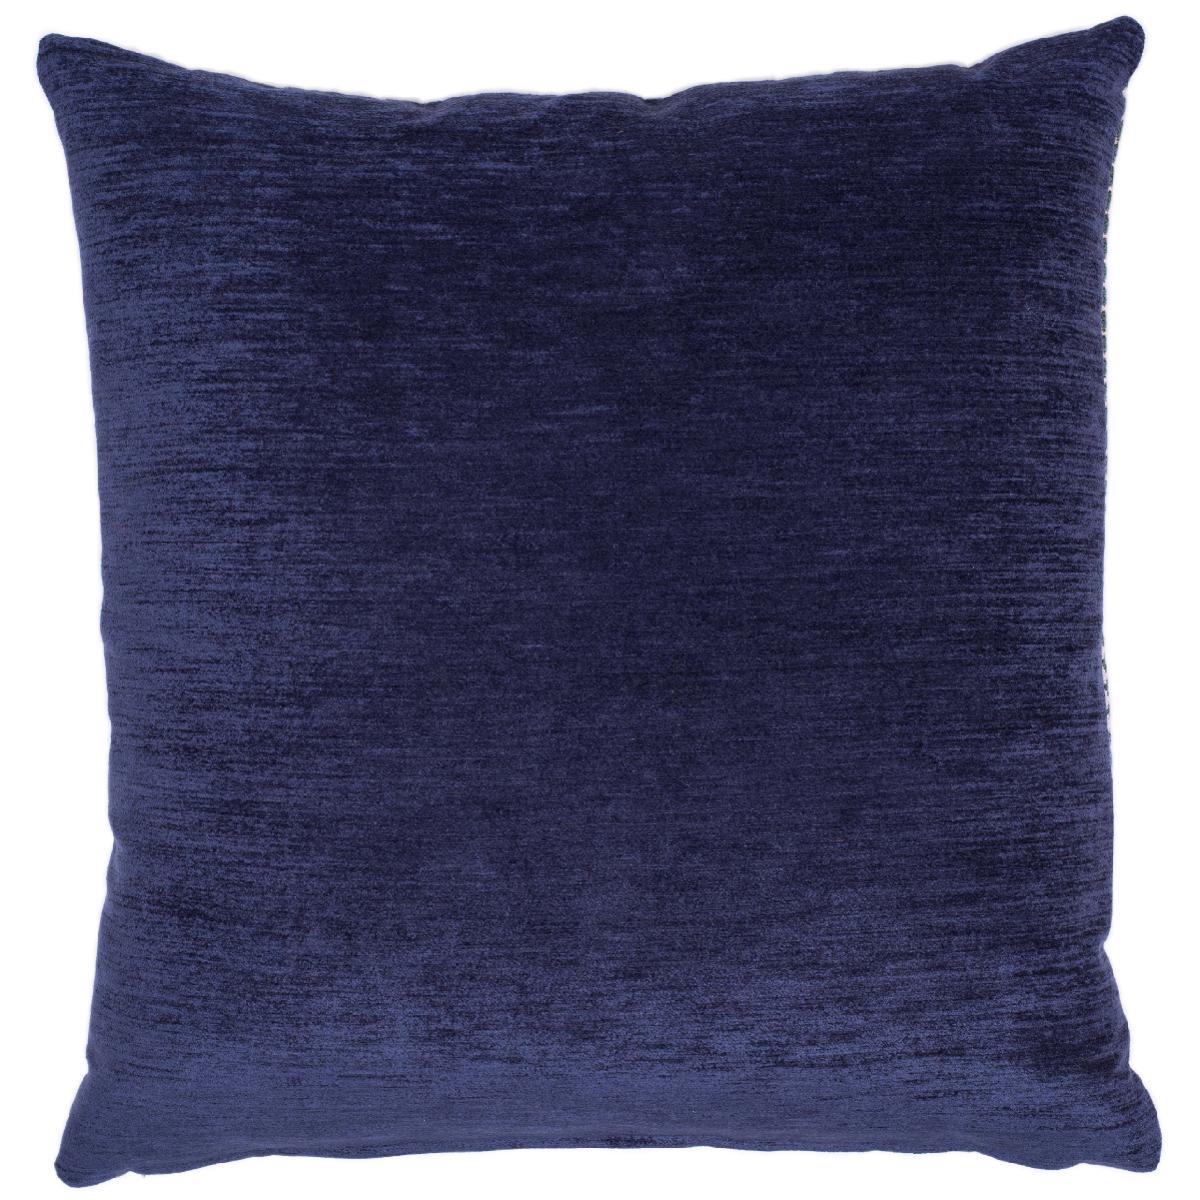 COLOUR: Blue with Blue Fringe
FRONT MATERIAL: 76% Viscose, 11% Polyester, 13% Cotton Jacquard woven fabric
BACK MATERIAL: Chenille 
FILLER: Feather
STOCK SIZE: 60cm x 60cm (approx)
ORIGIN: Fabric produced in Turkey, cushions made in the UK

Here at